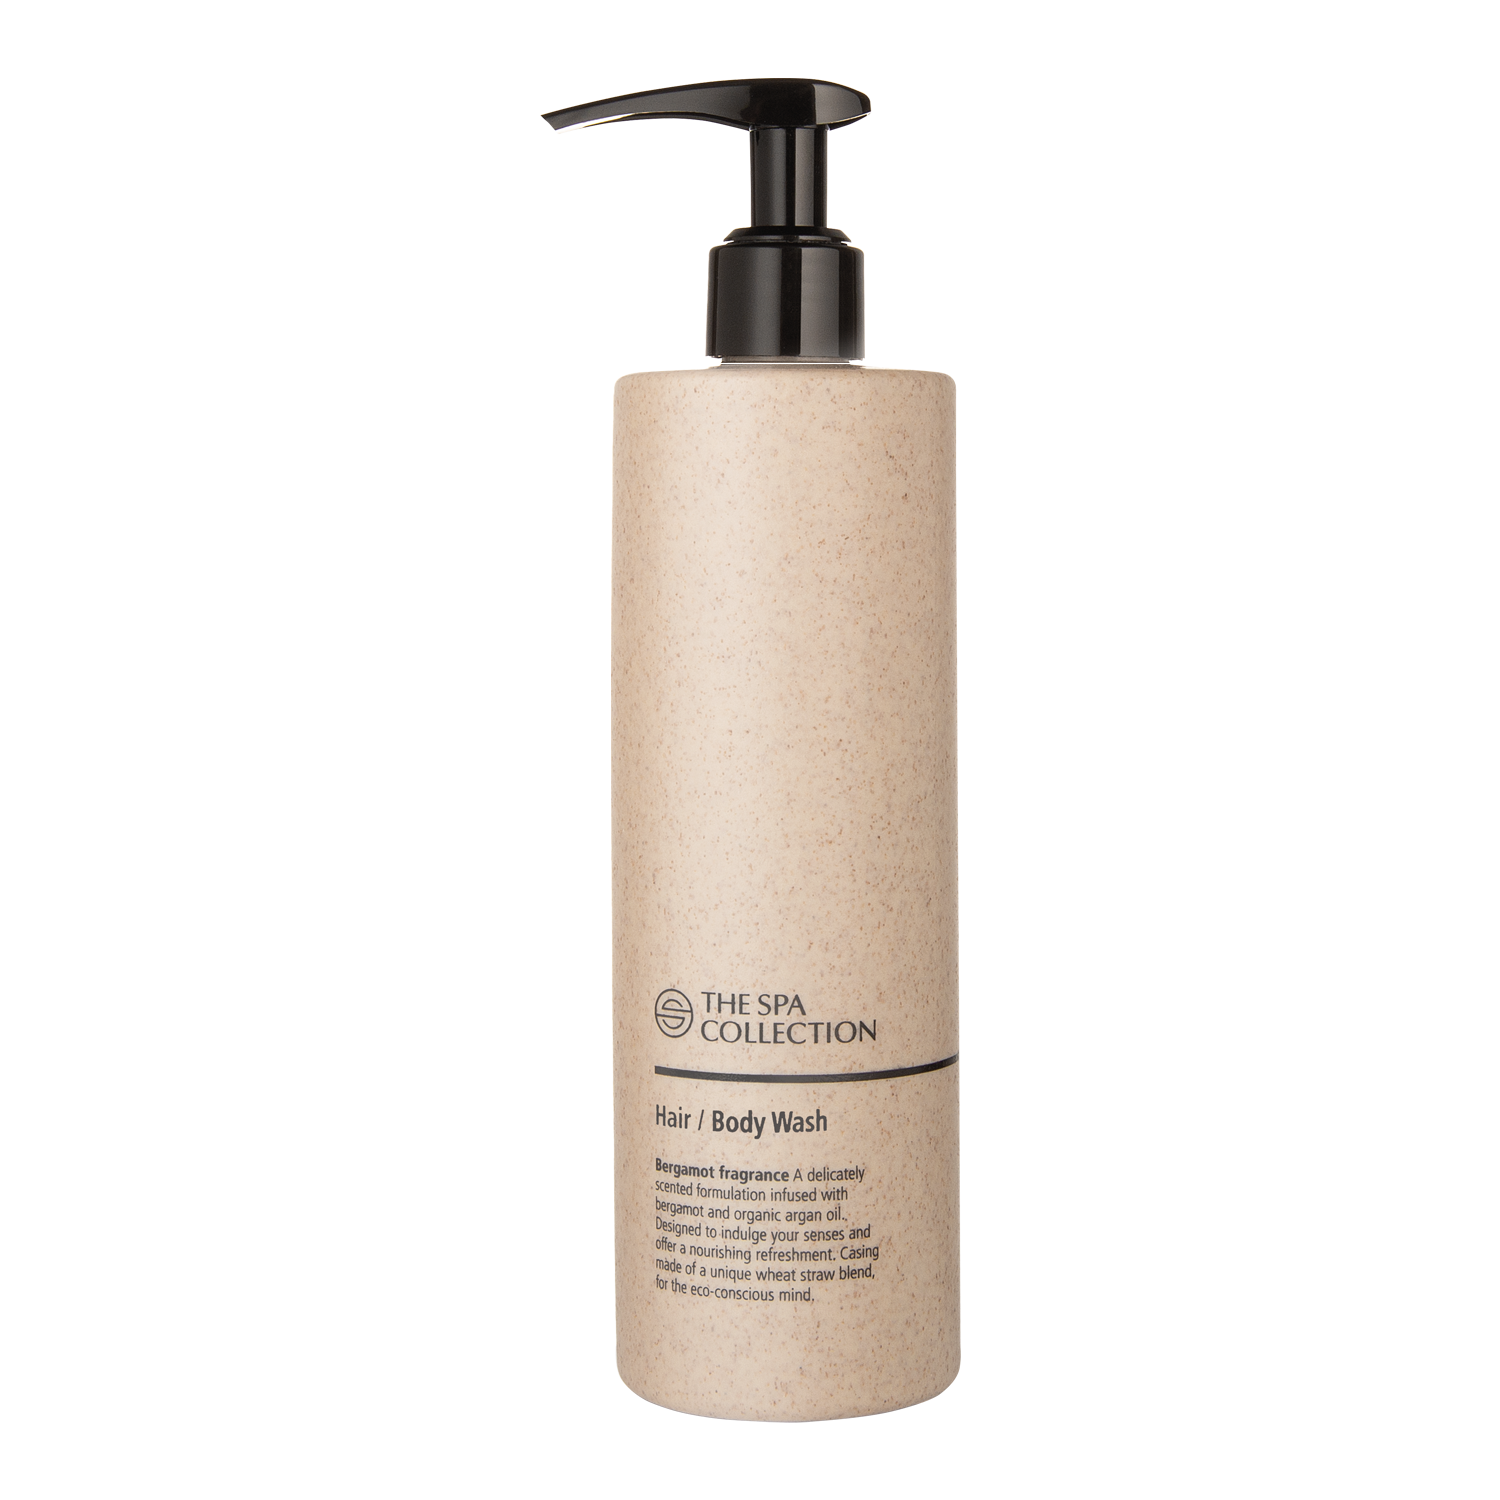 Eco-friendly luxurious hair and body wash with bergamot fragrance in 400ml recyclable wheatstraw bottle by The Spa Collection.